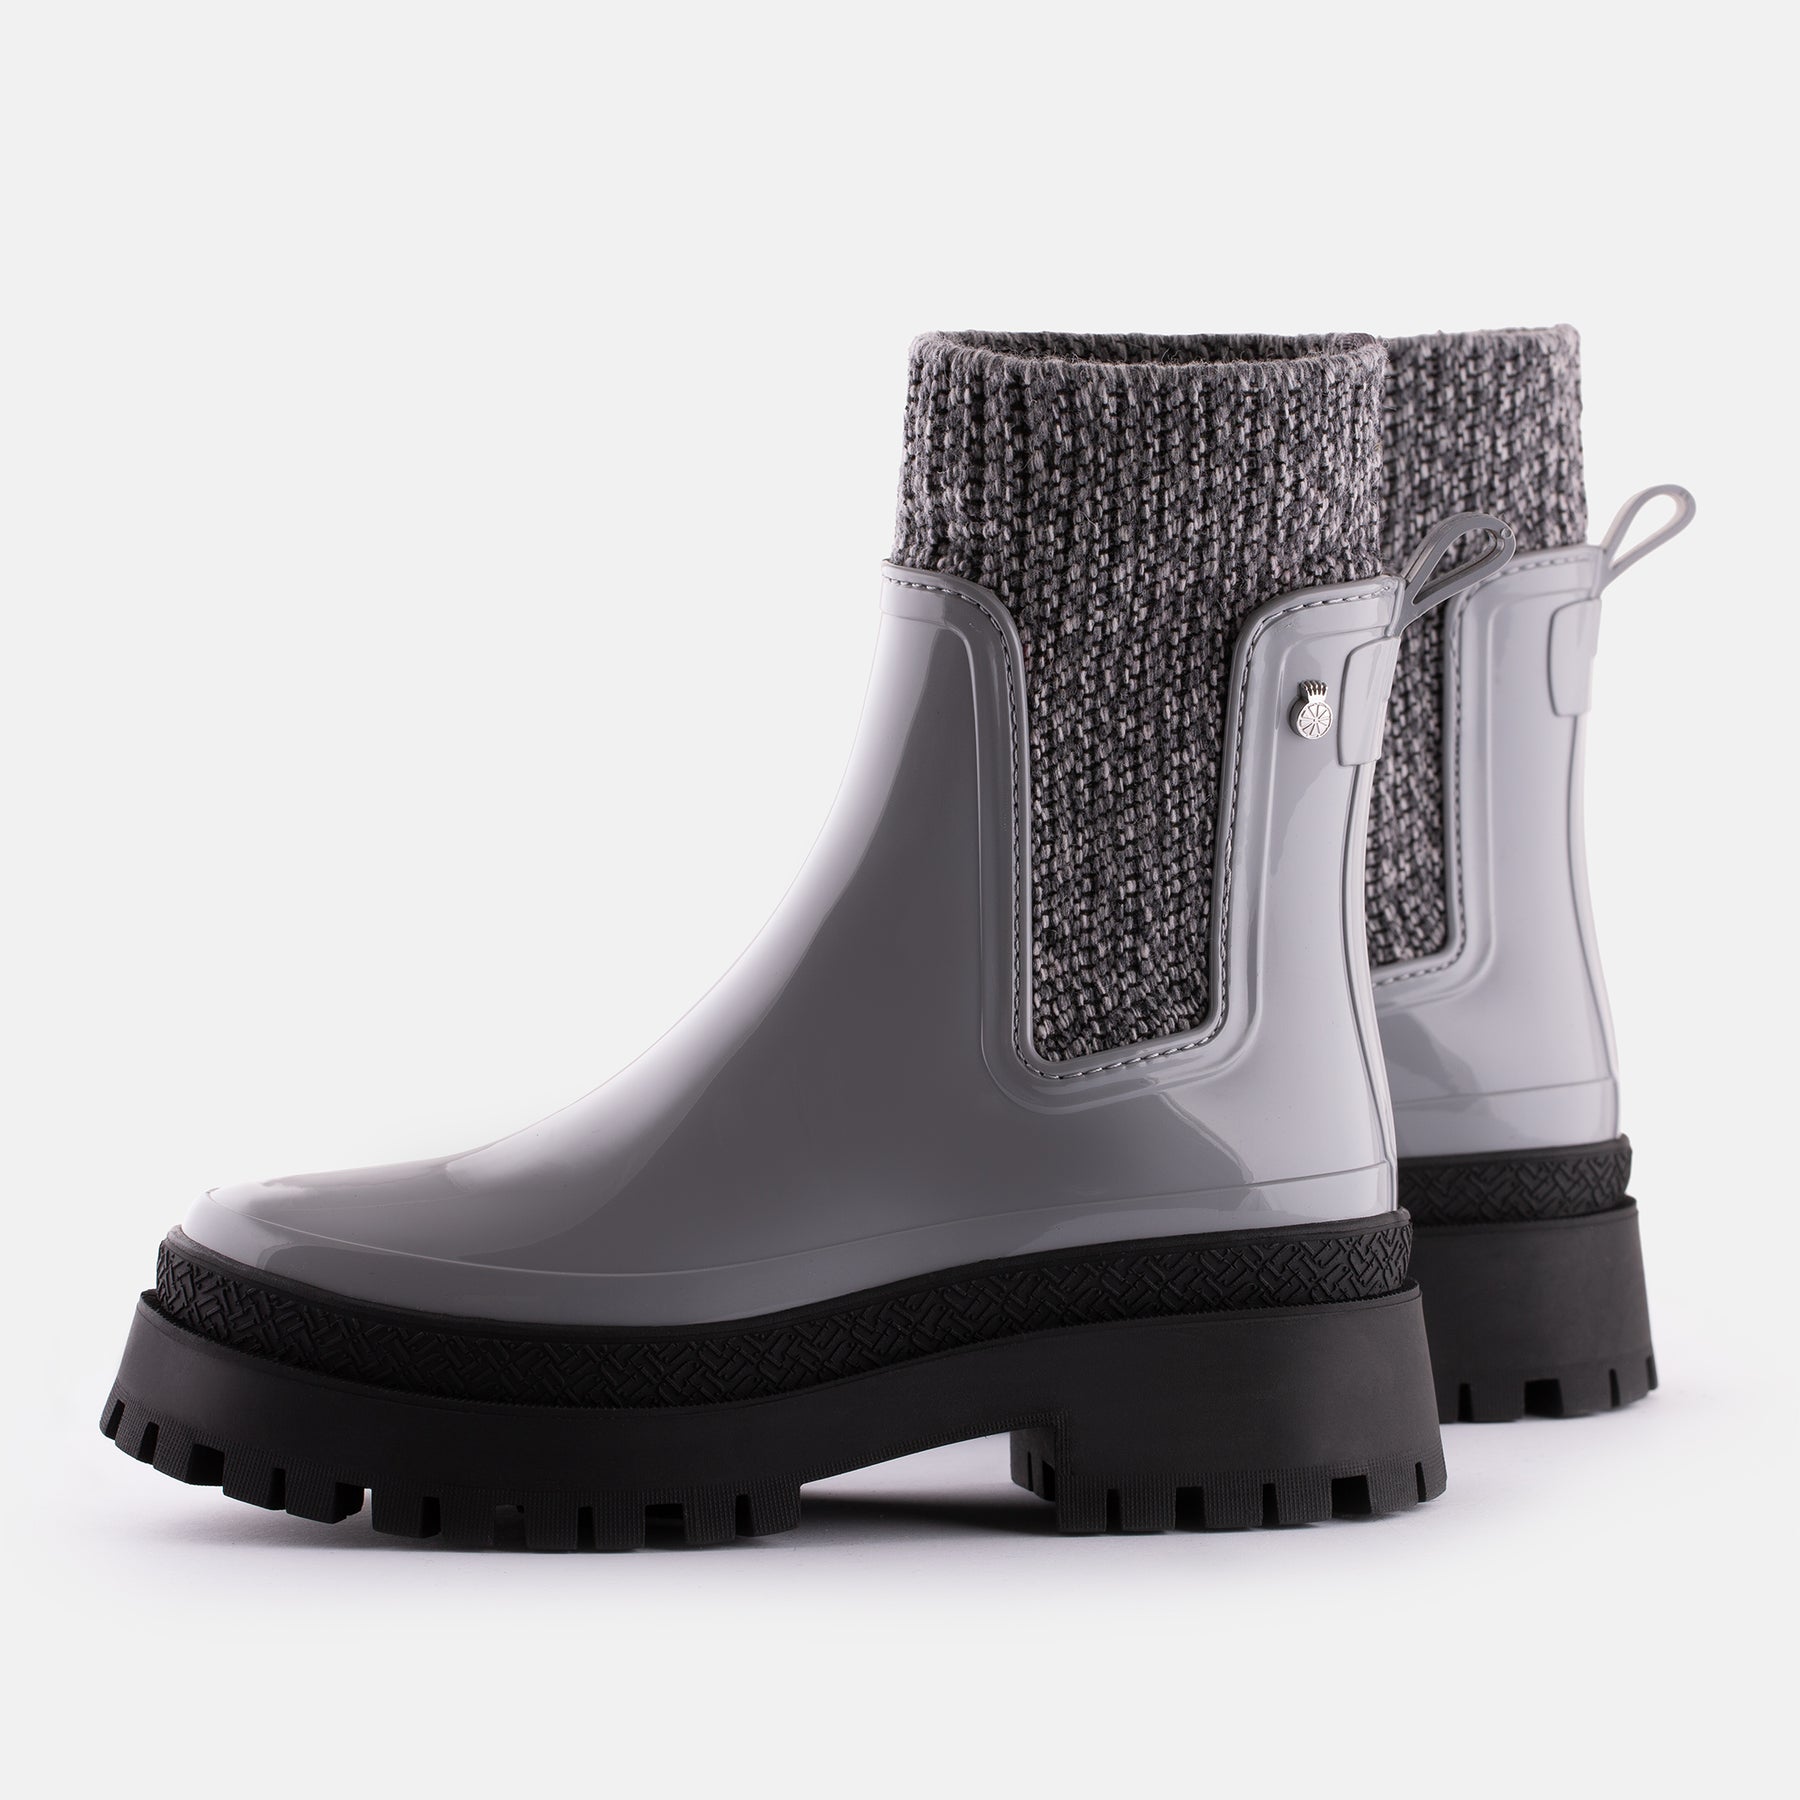 Emely Steel - Chelsea Boots for Women - Steel Colour Boots